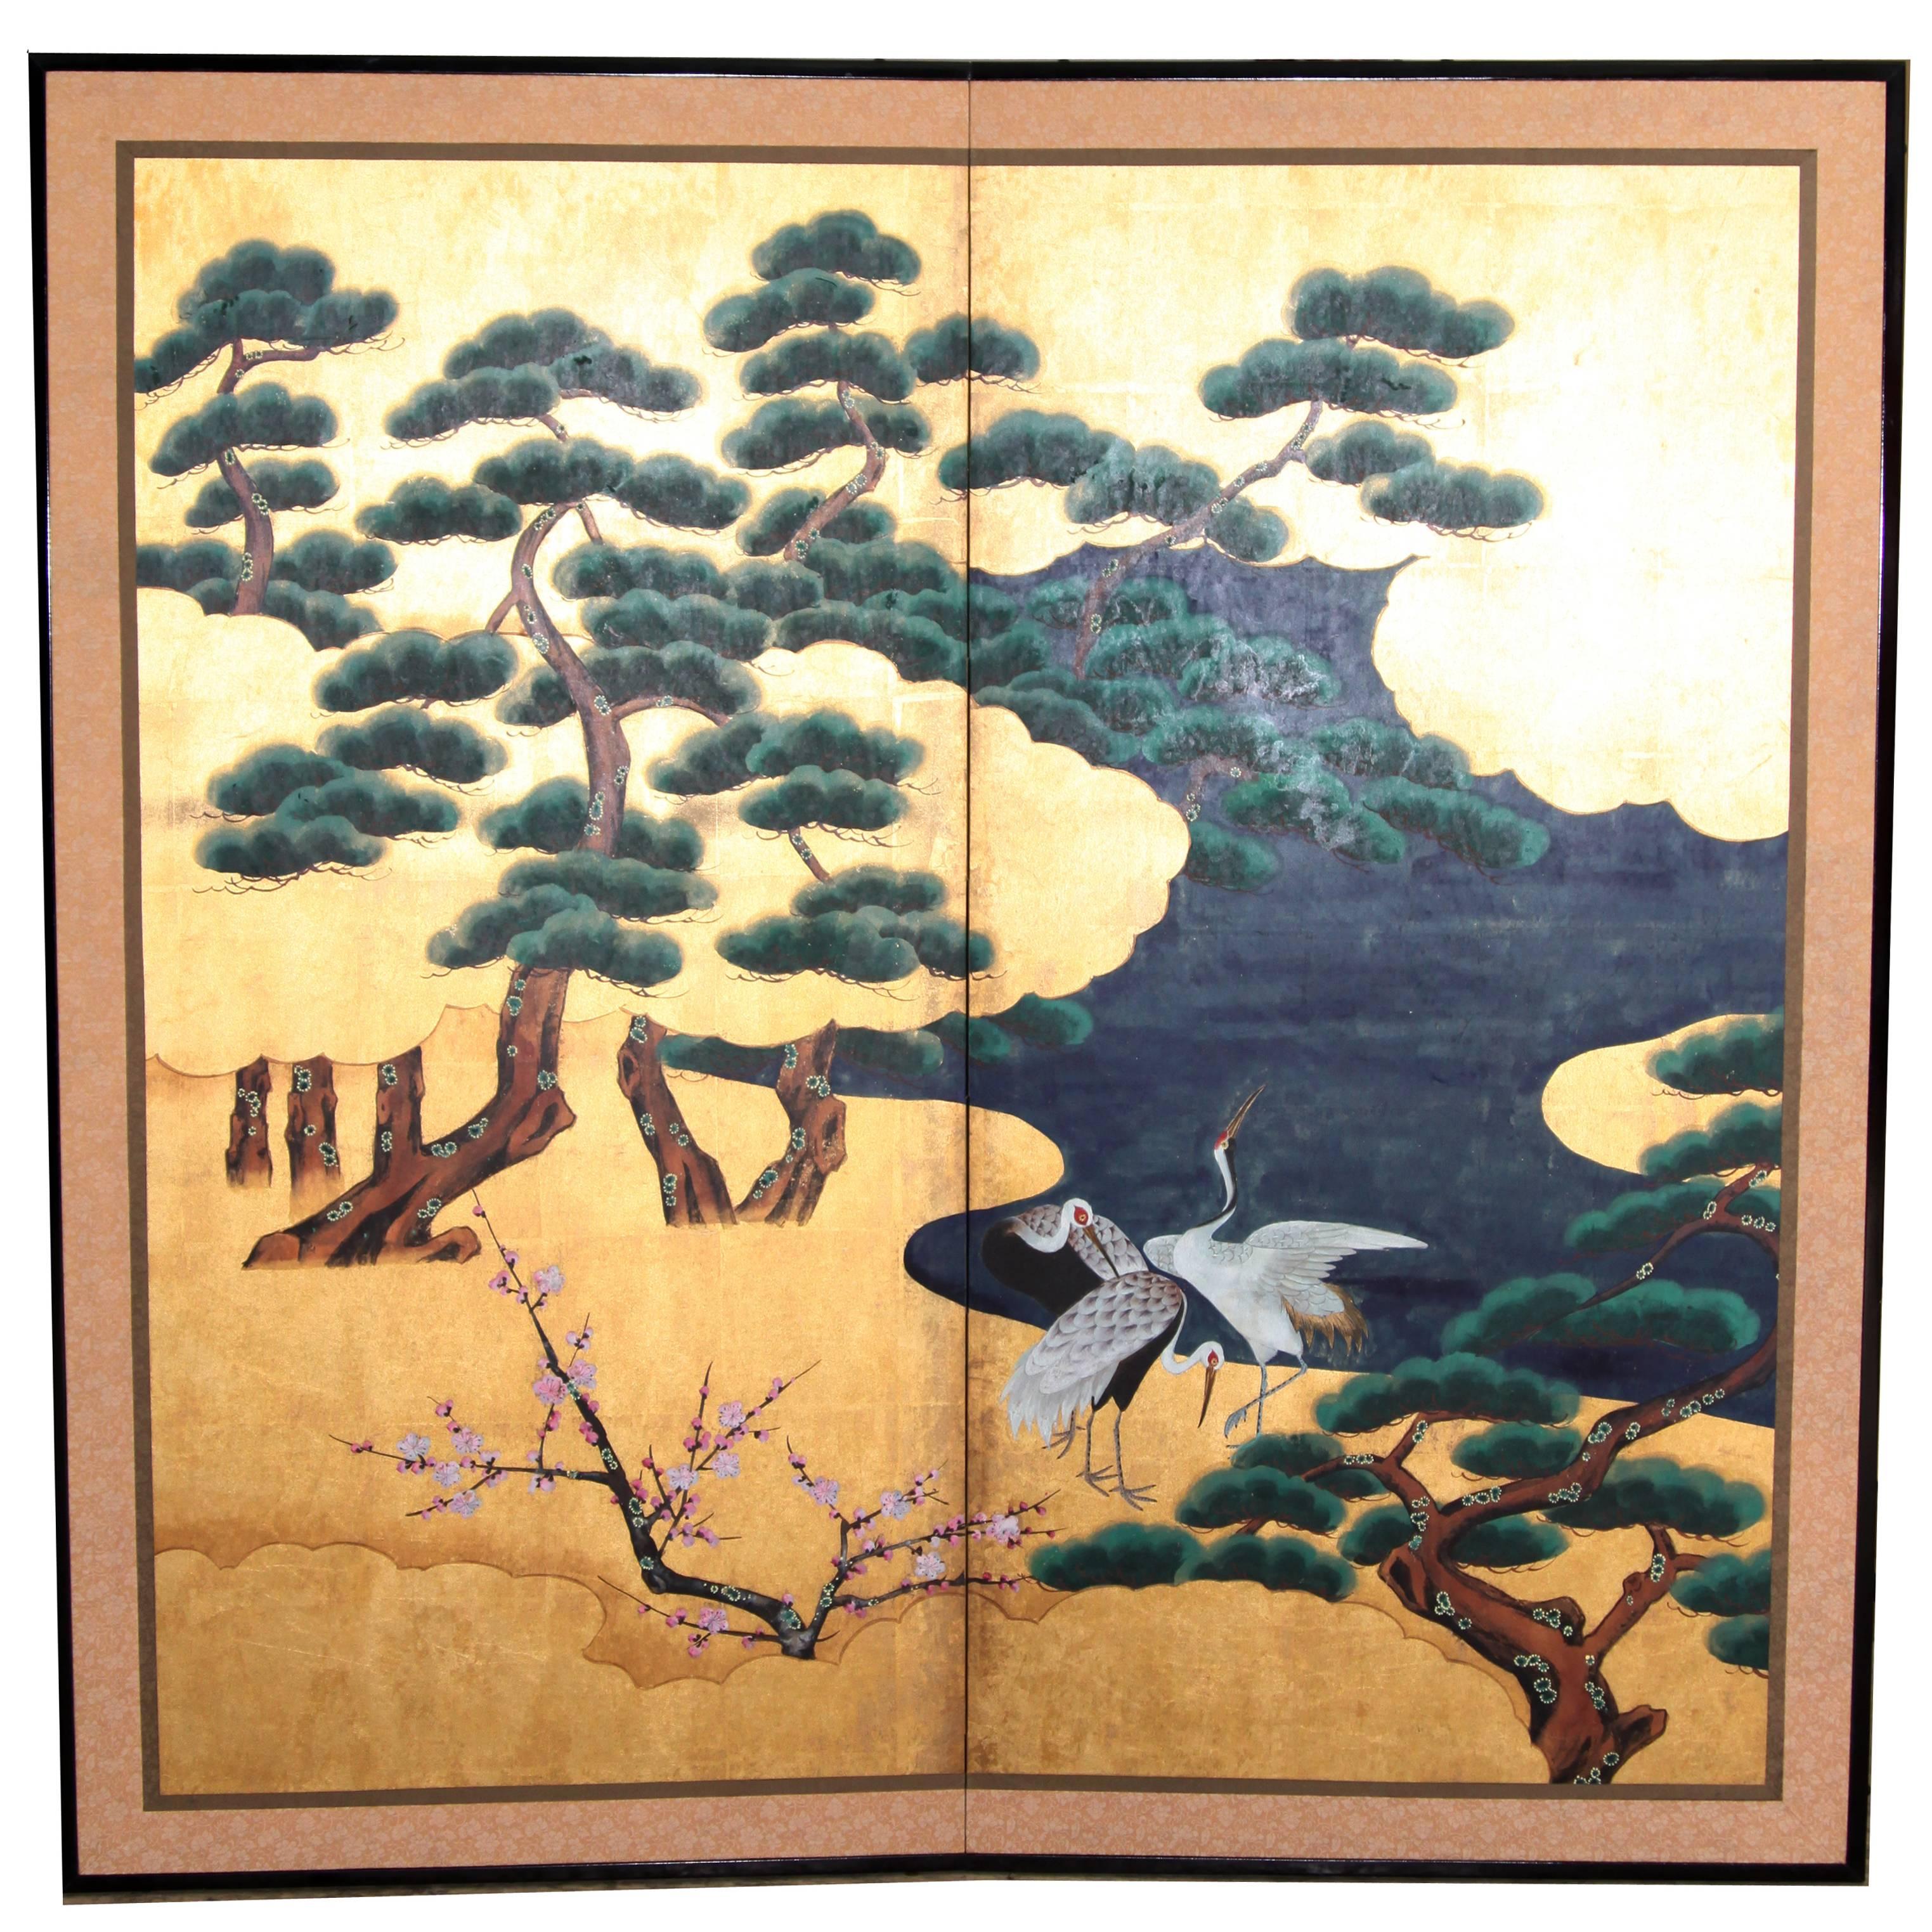 Handpainted Japanese Folding Screen 'Byobu' Cranes by the River, Gold Leaf